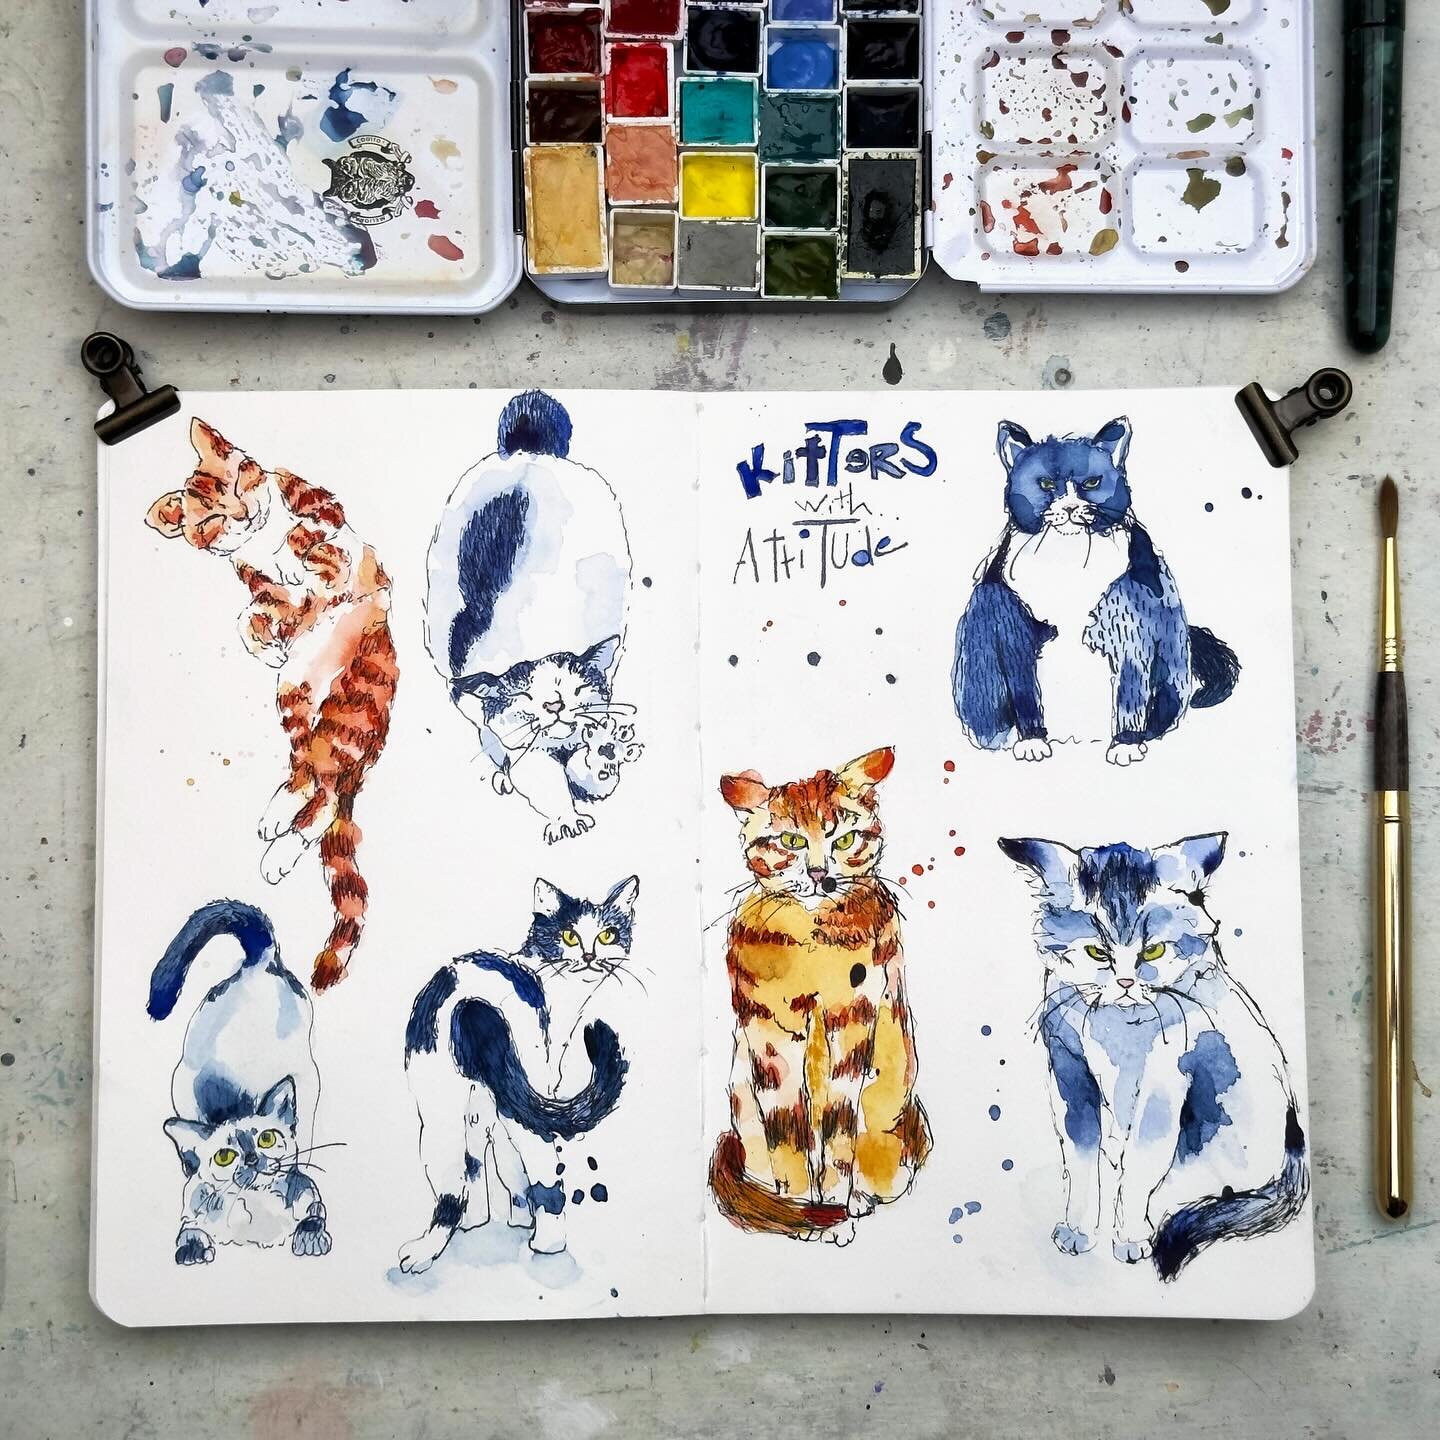 Kitters with AtiTude 🐾
Week 3 of #100dayproject 
I had fun with these kitters this week and am sure to circle back to more kitters with atitude.  I also followed one of my own parameters and happily forgot all about this on the weekend. Let&rsquo;s 